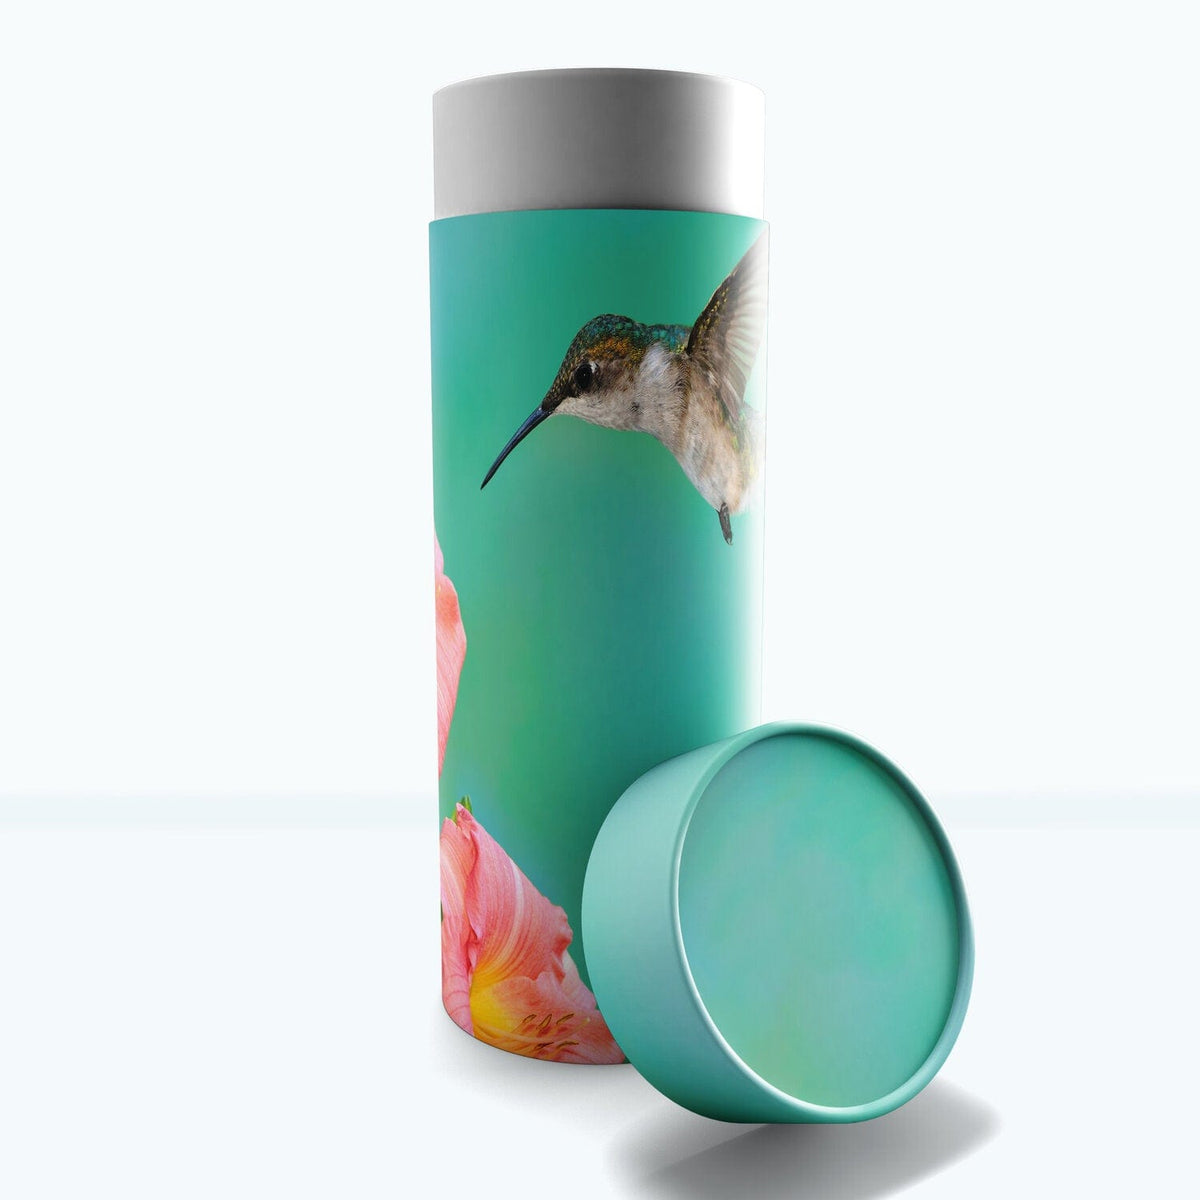 Commemorative Cremation Urns Small Hummingbird Biodegradable &amp; Eco Friendly Burial or Scattering Urn / Tube